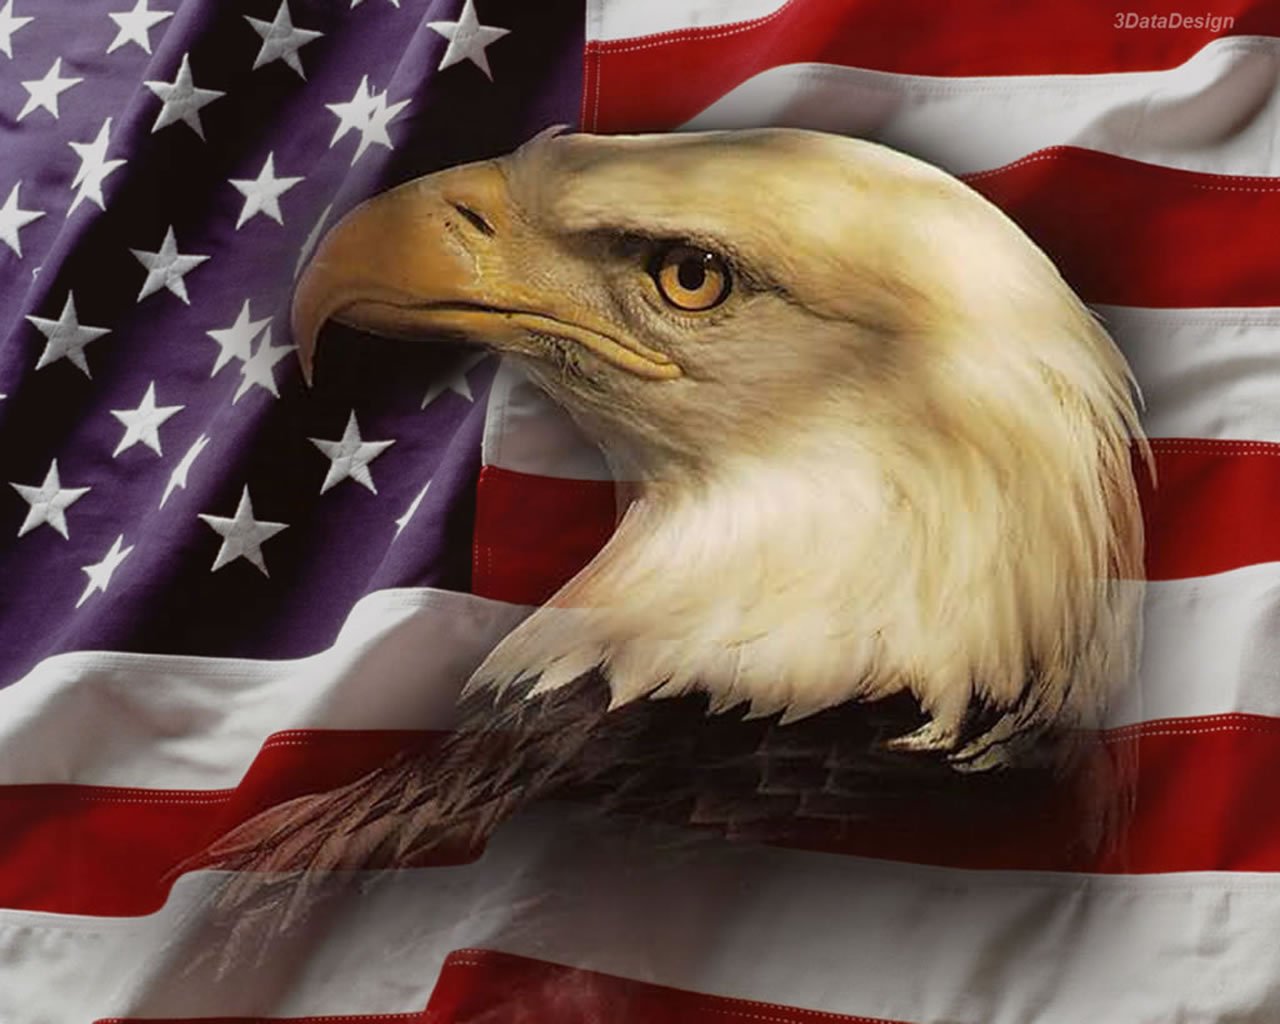 American Flag Background with Eagle wallpaper wallpaper hd